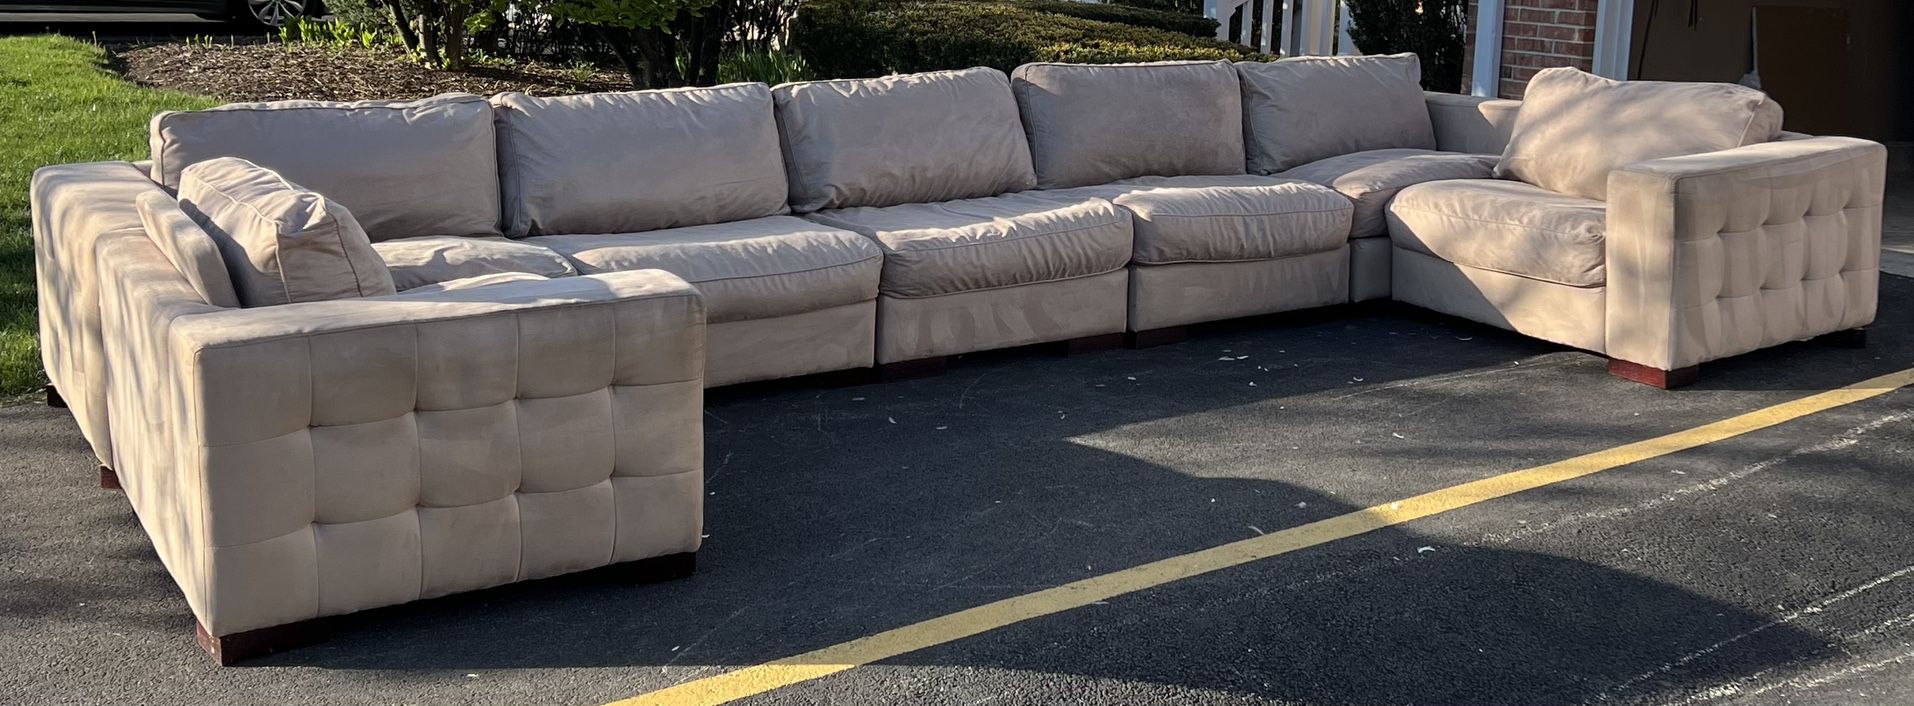 Very Large Adjustable Beige/Cream Sectional Couch Set + Couch/Loveseat 